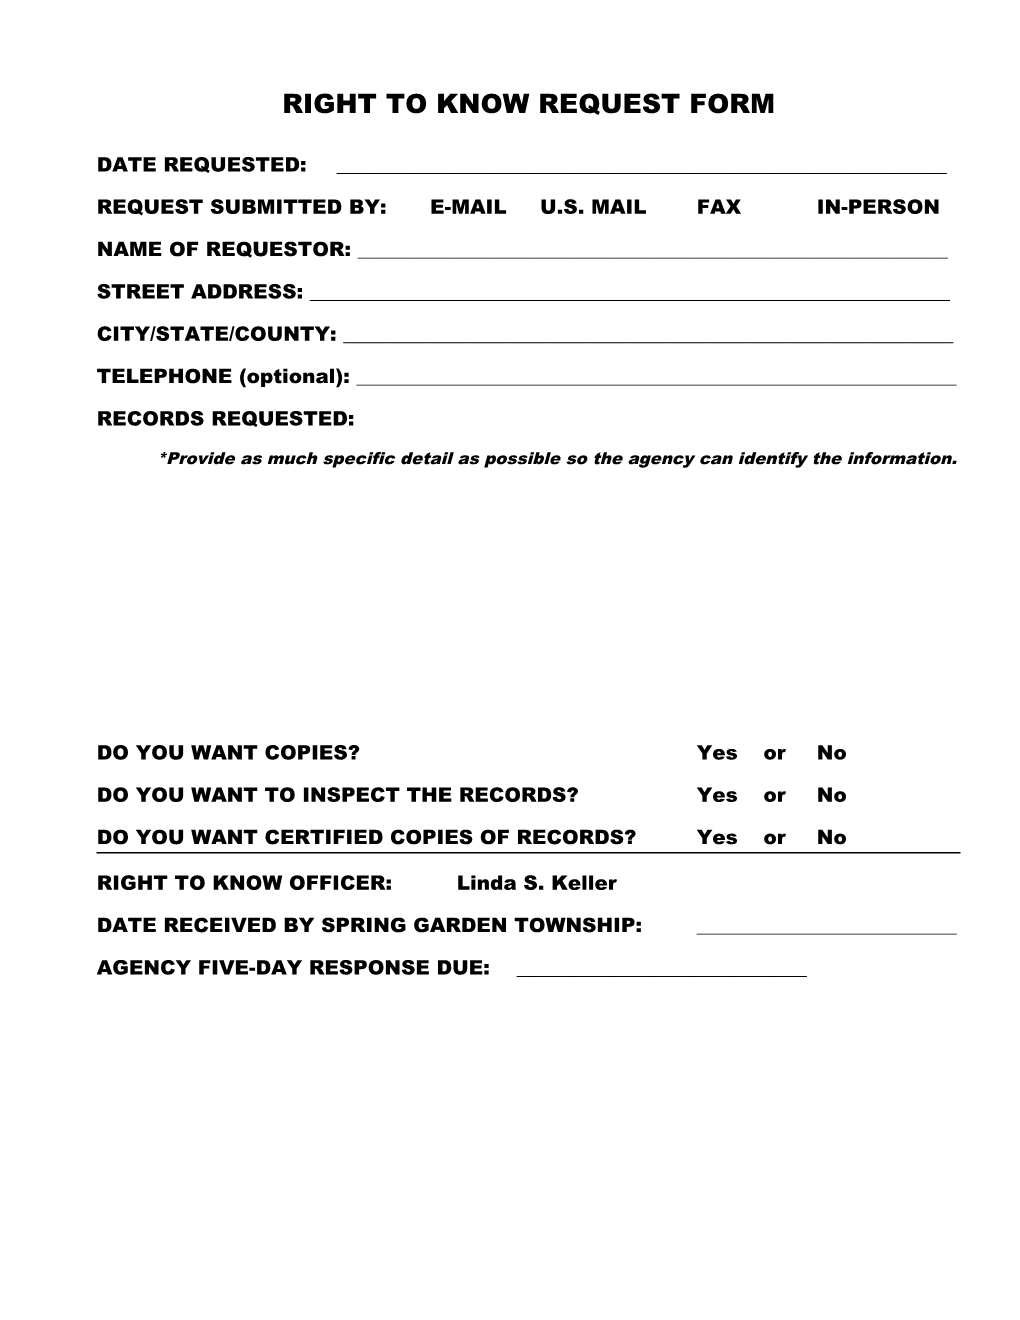 Right to Know Request Form